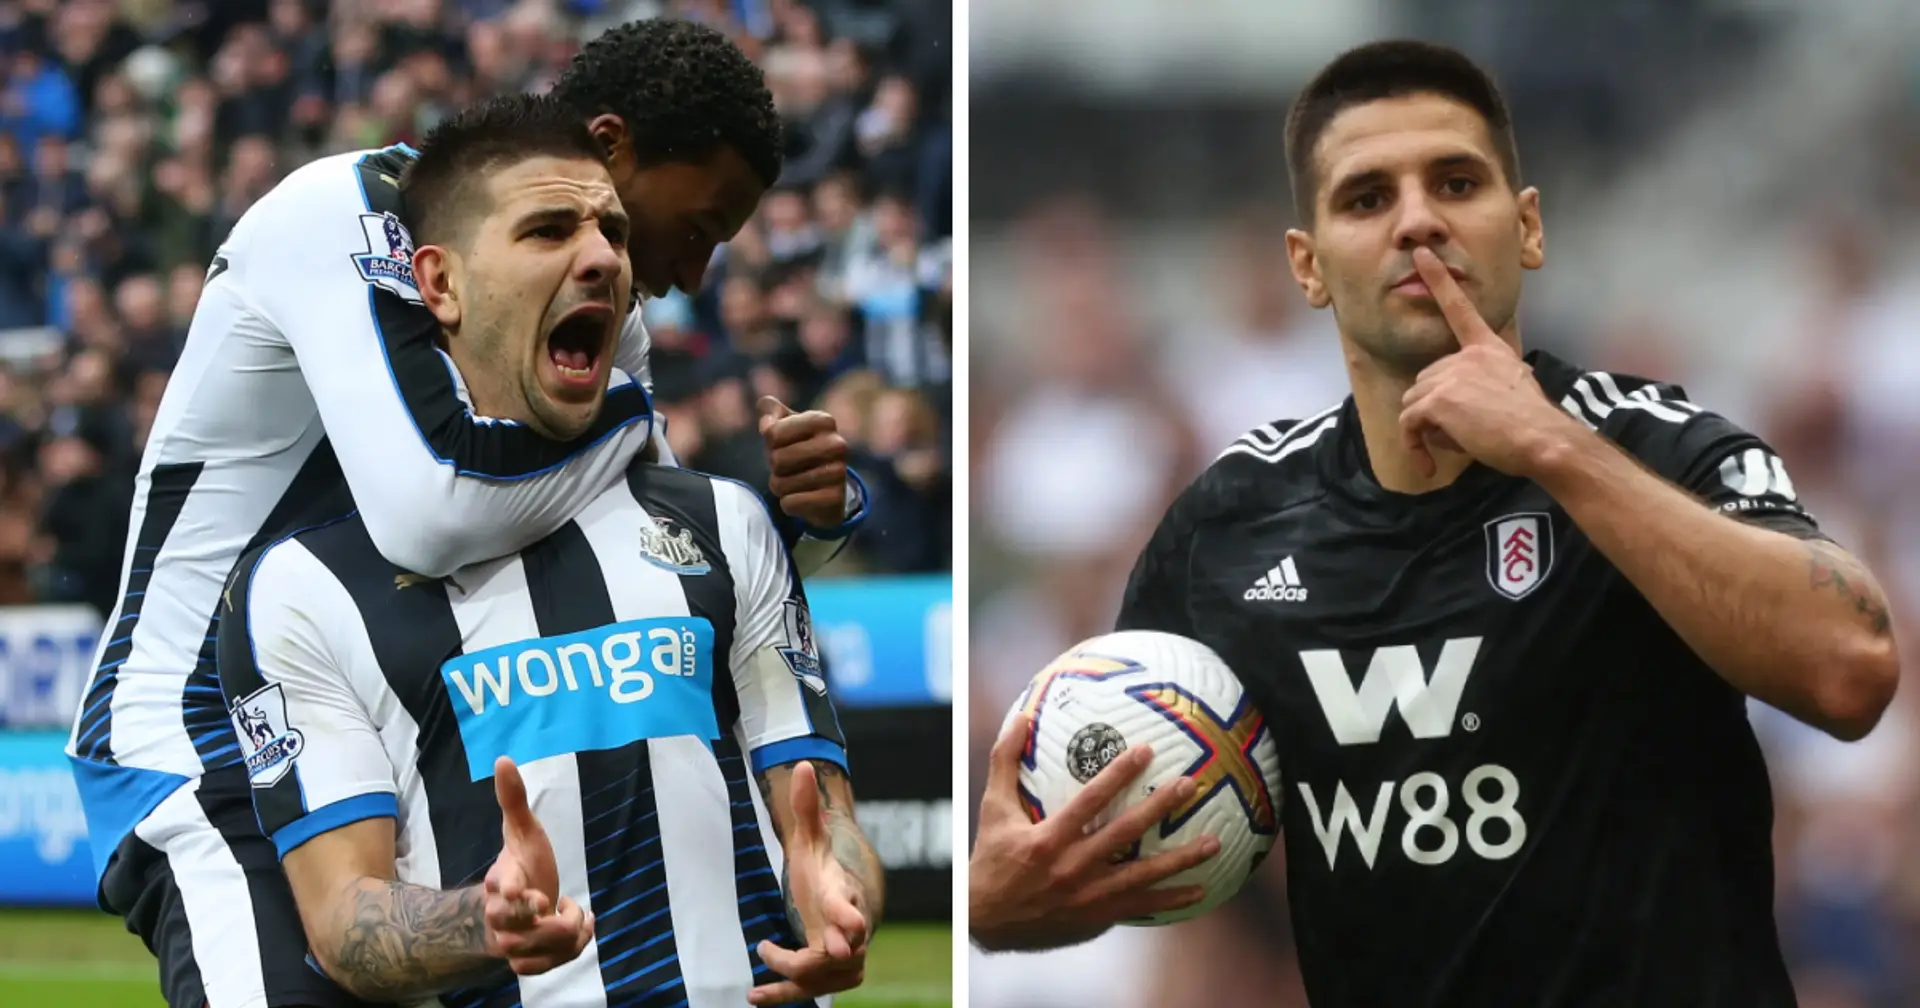 'I have no nostalgia for England': Mitrovic aims dig at Fulham and Newcastle claiming he is finally at a top club